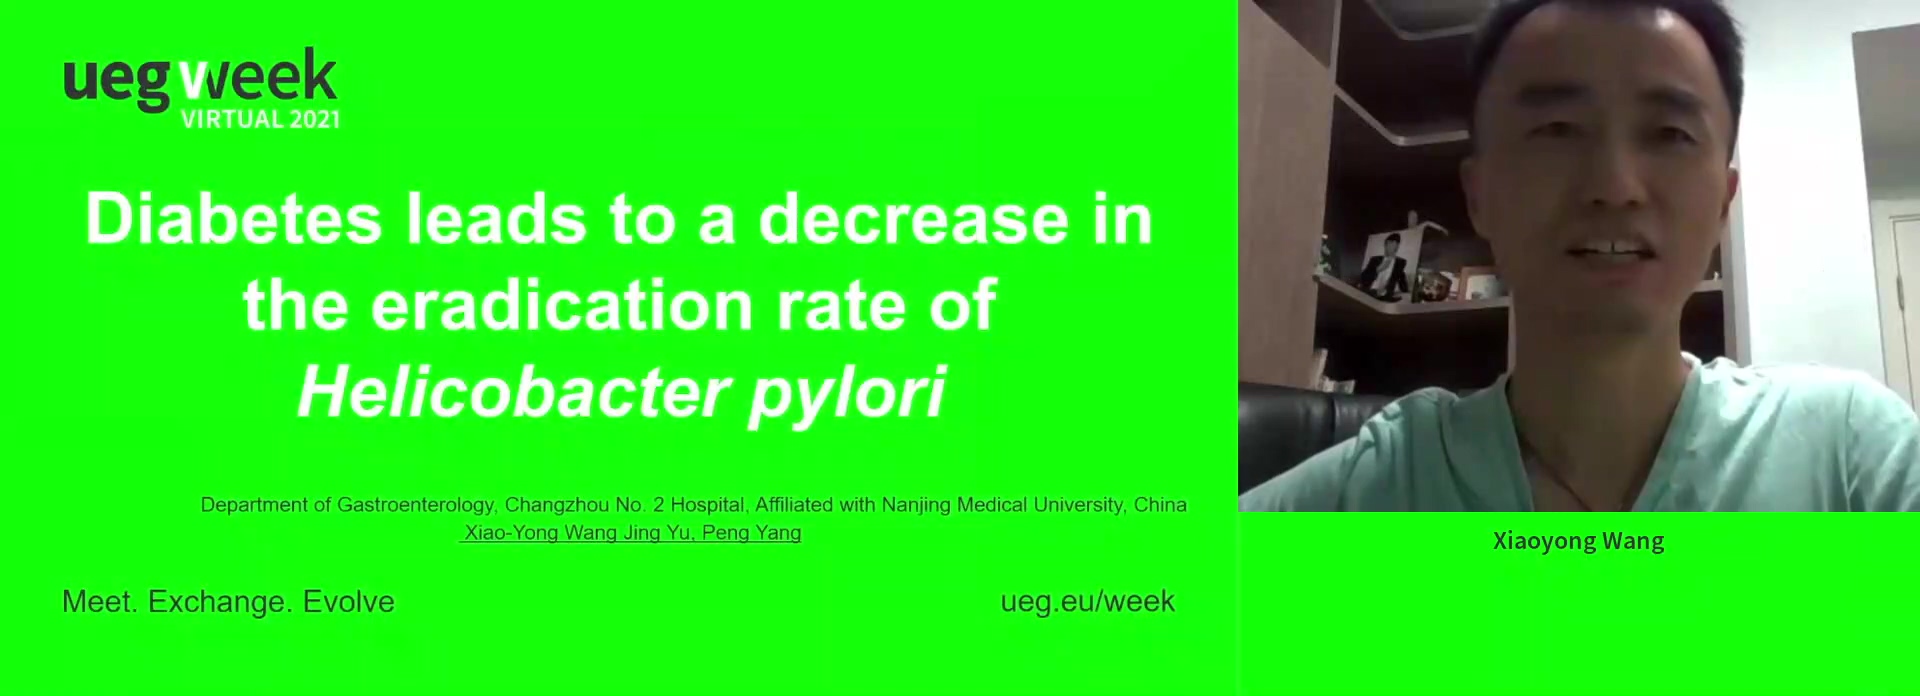 DIABETES LEADS TO A DECREASE IN THE ERADICATION RATE OF HELICOBACTER PYLORI